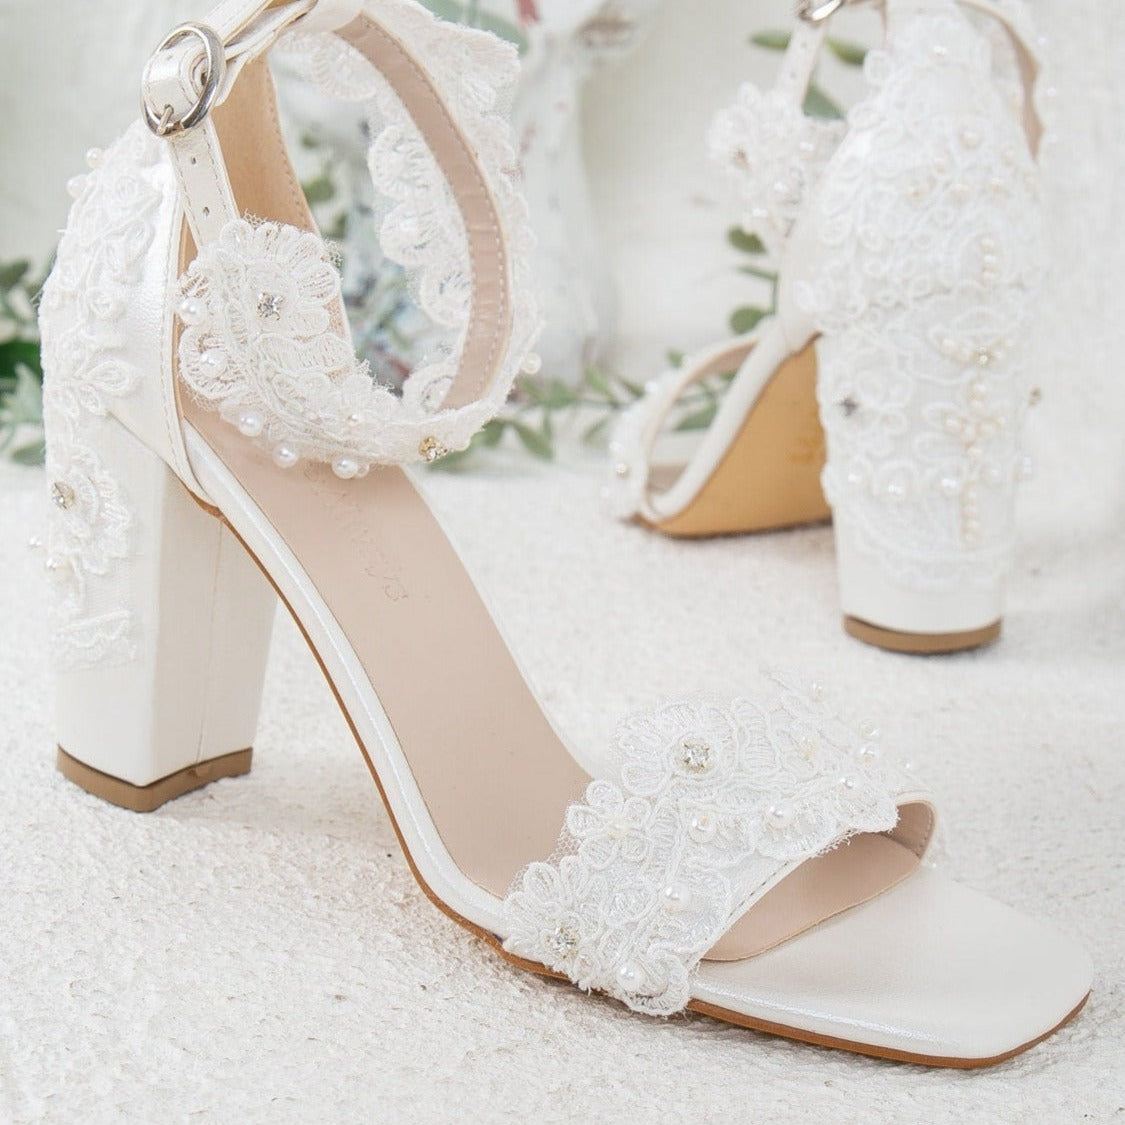 Vintage Ivory Lace Wedding Shoes - Low Heel Bridal Shoes House of Elliot